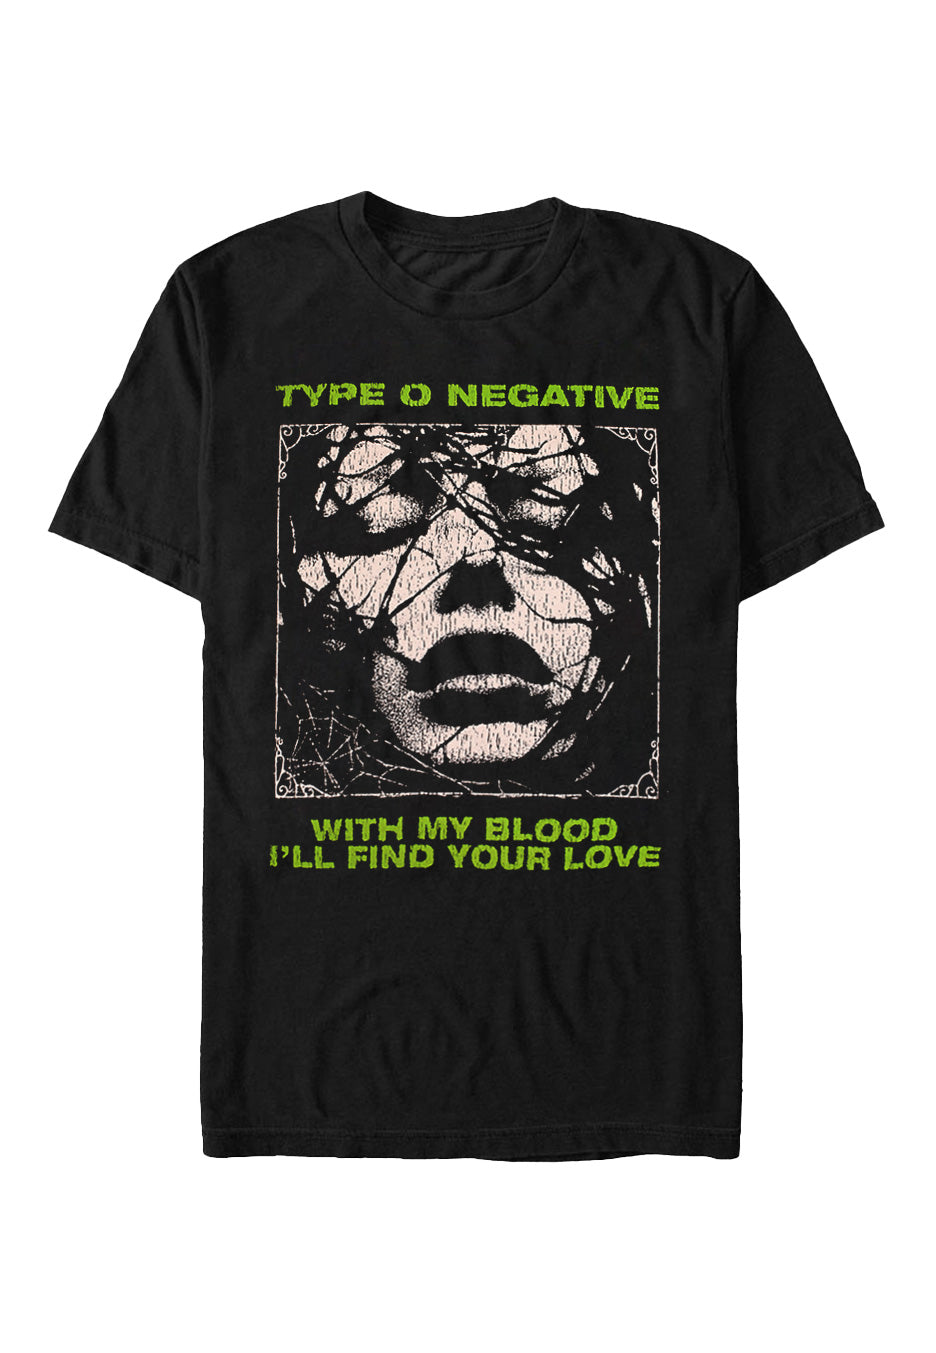 Type O Negative - With My Blood - T-Shirt